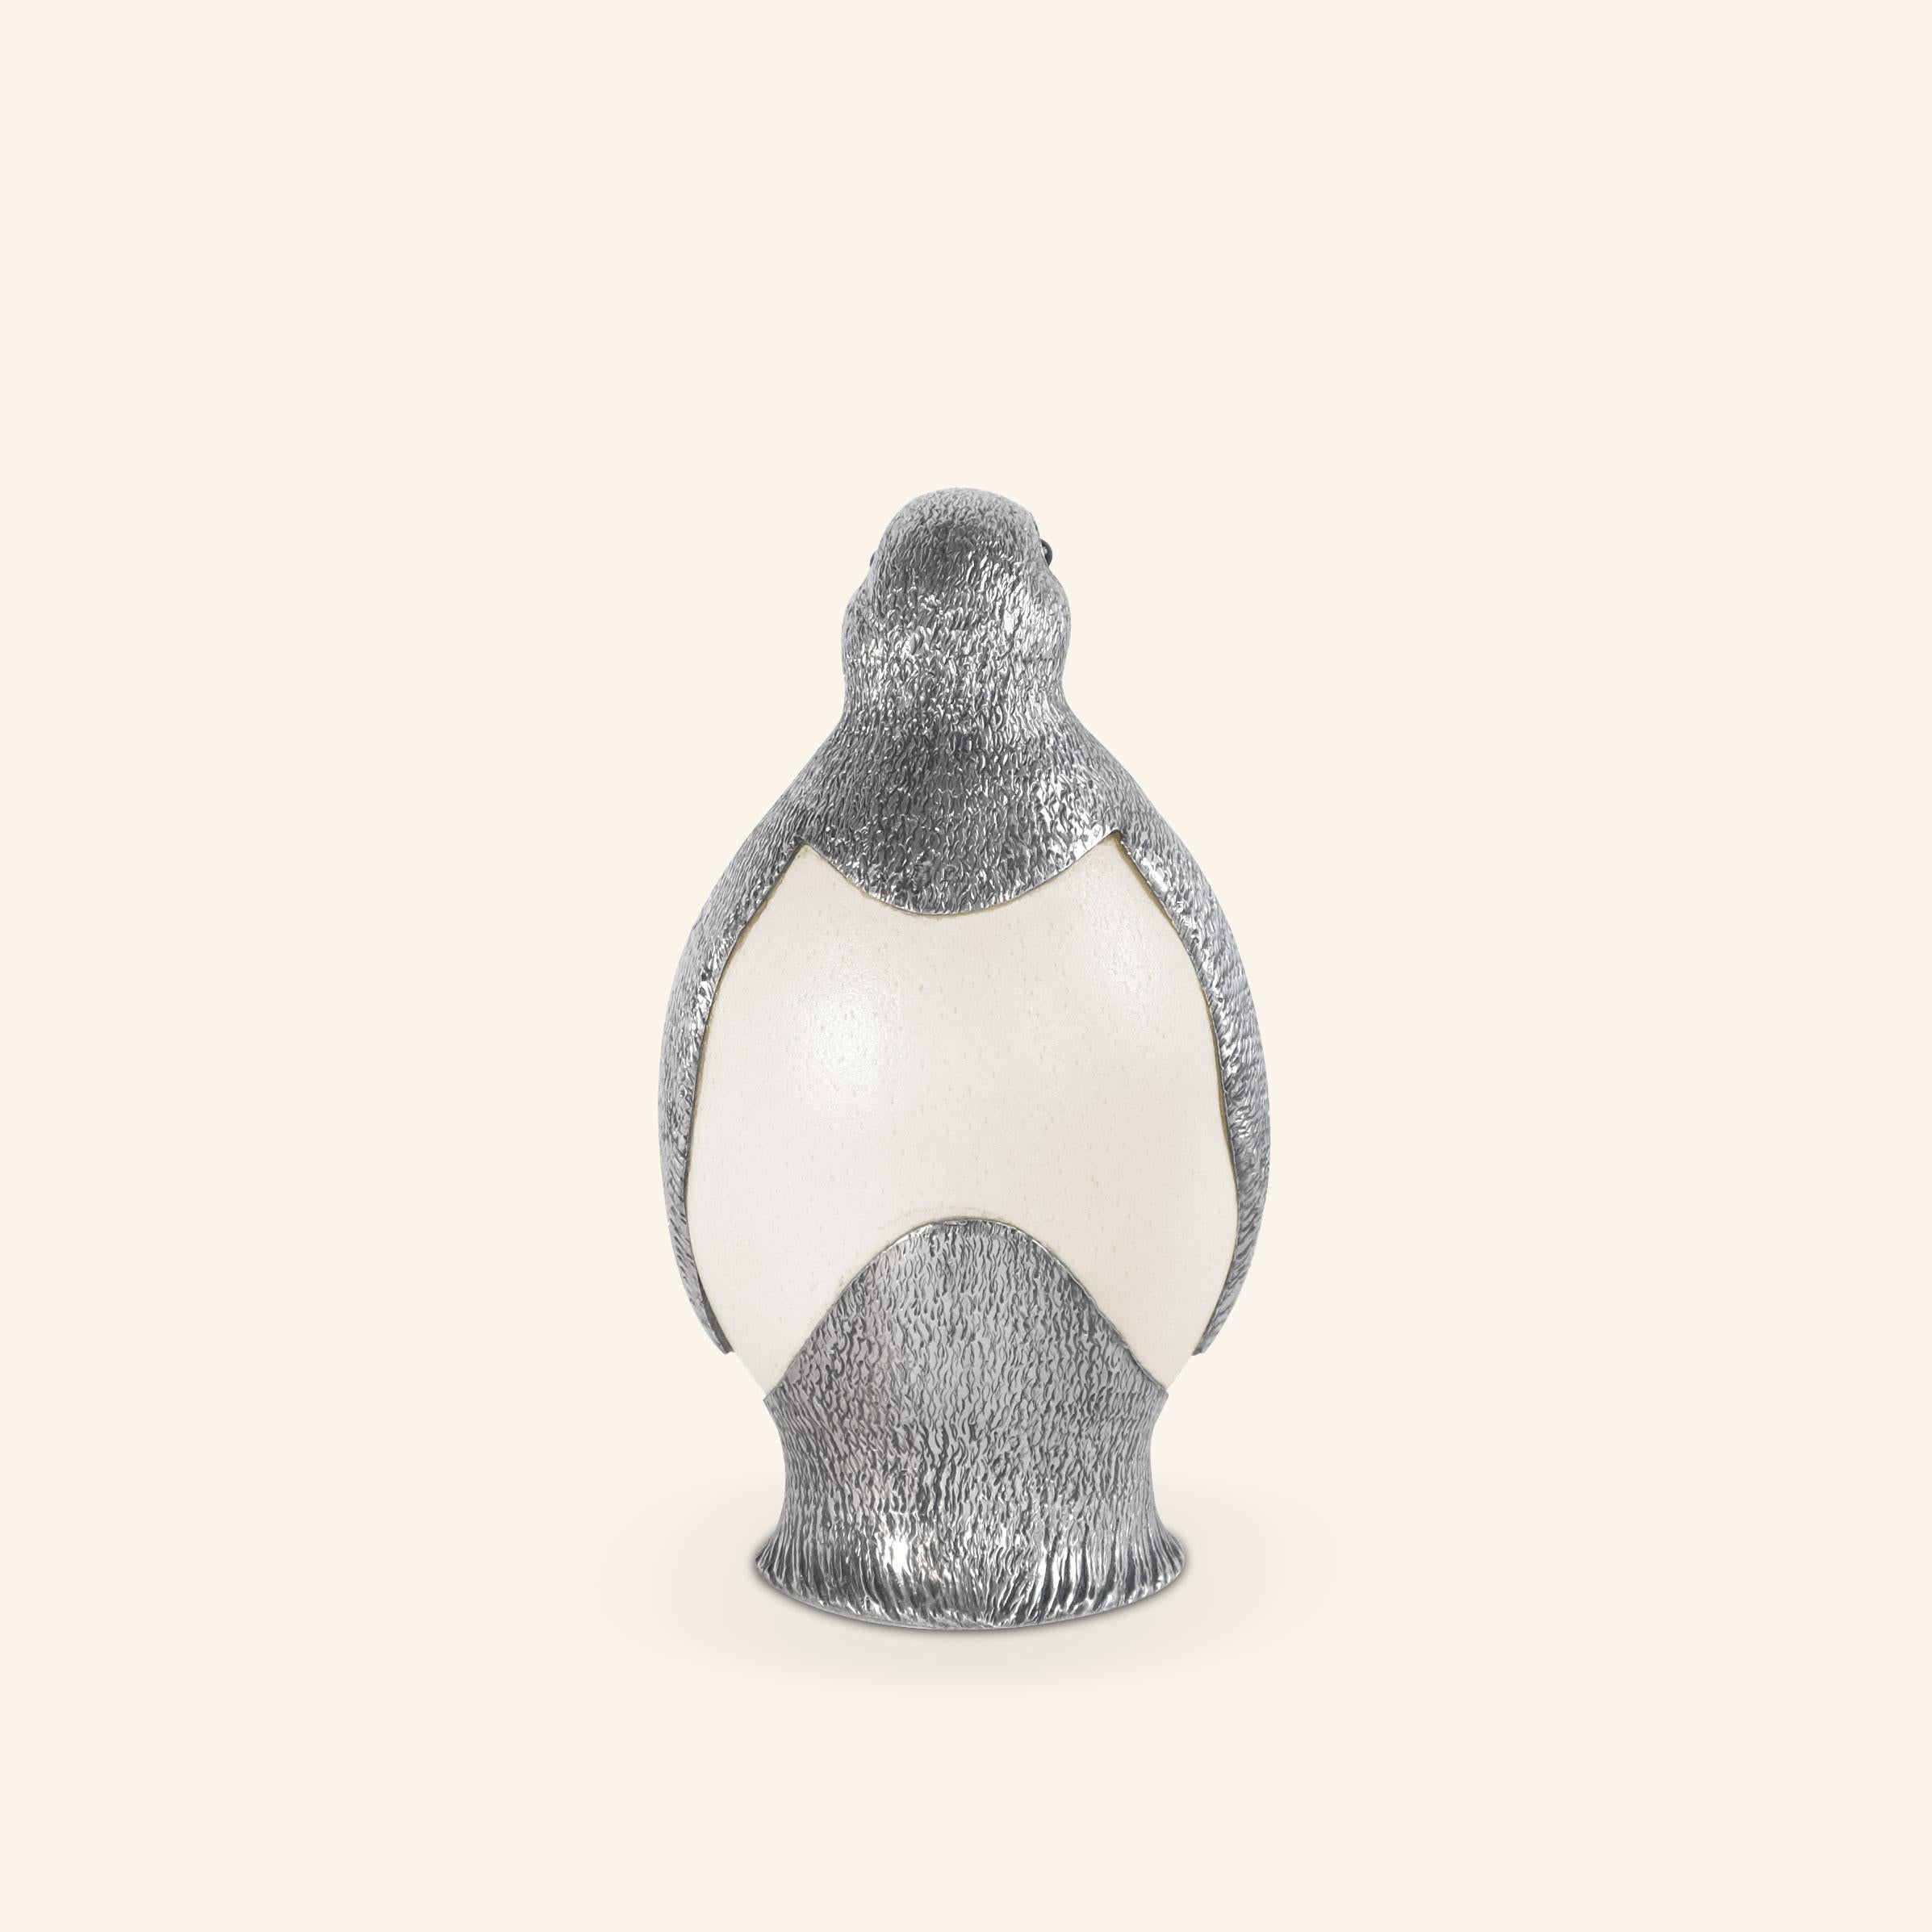 Portuguese Penguin by Alcino Silversmith Handcrafted in Sterling Silver with Ostrich Egg For Sale